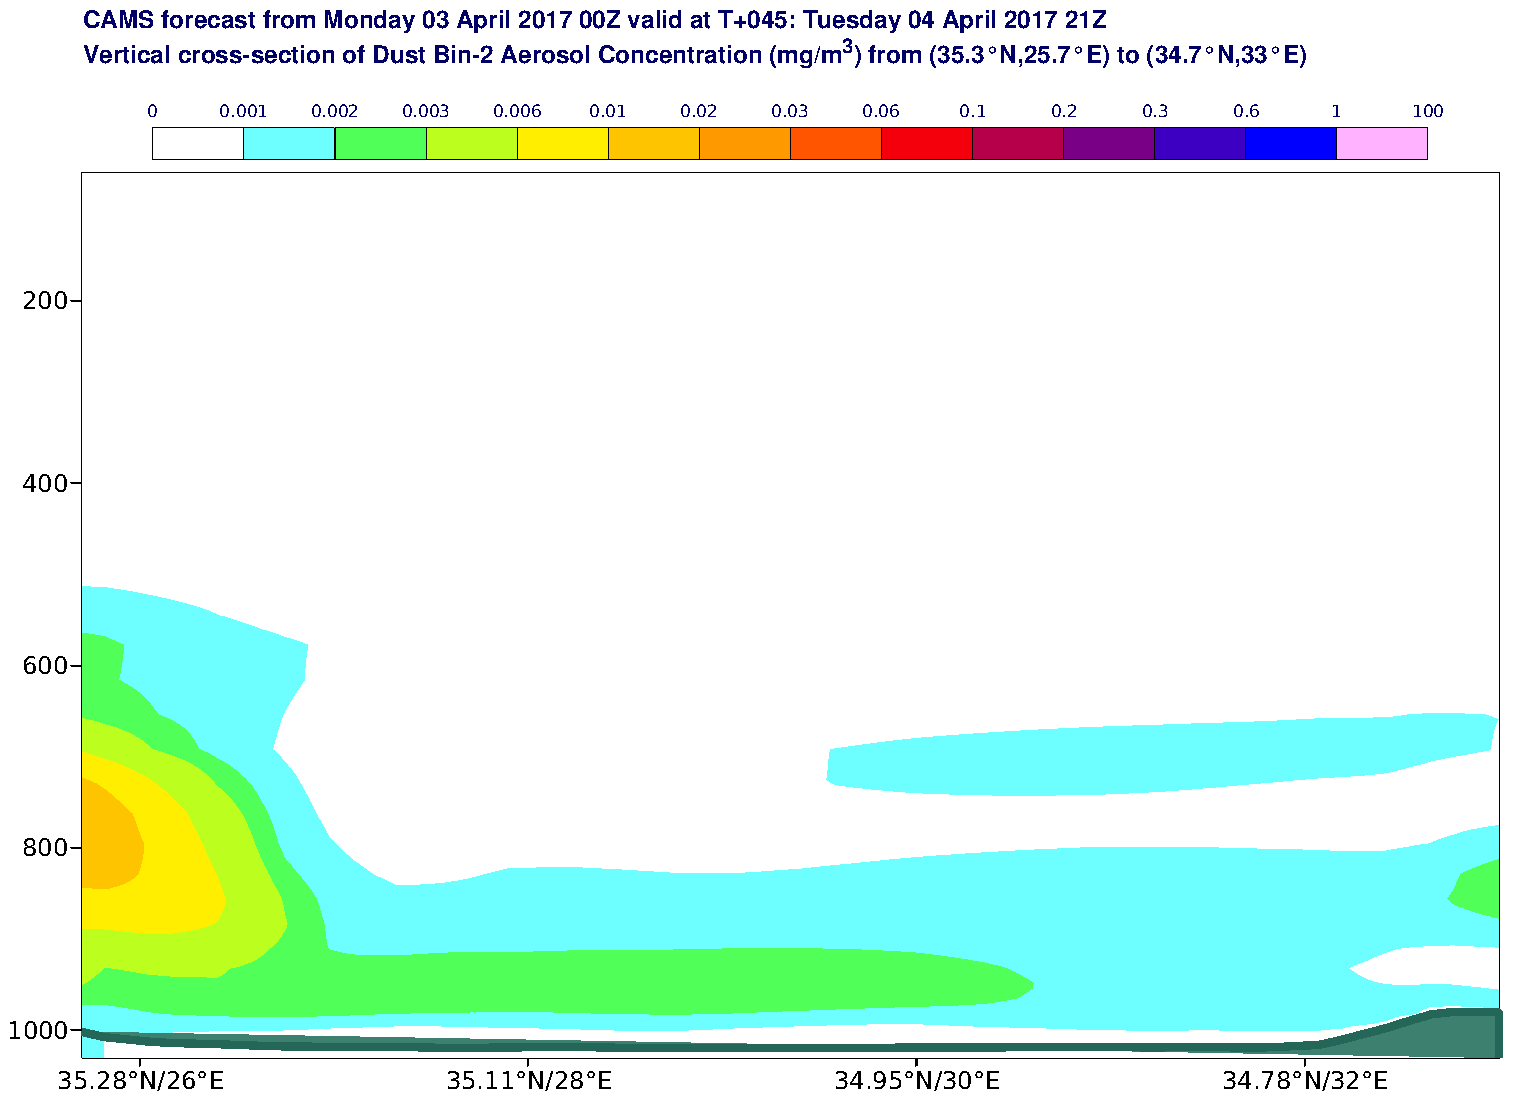 Vertical cross-section of Dust Bin-2 Aerosol Concentration (mg/m3) valid at T45 - 2017-04-04 21:00